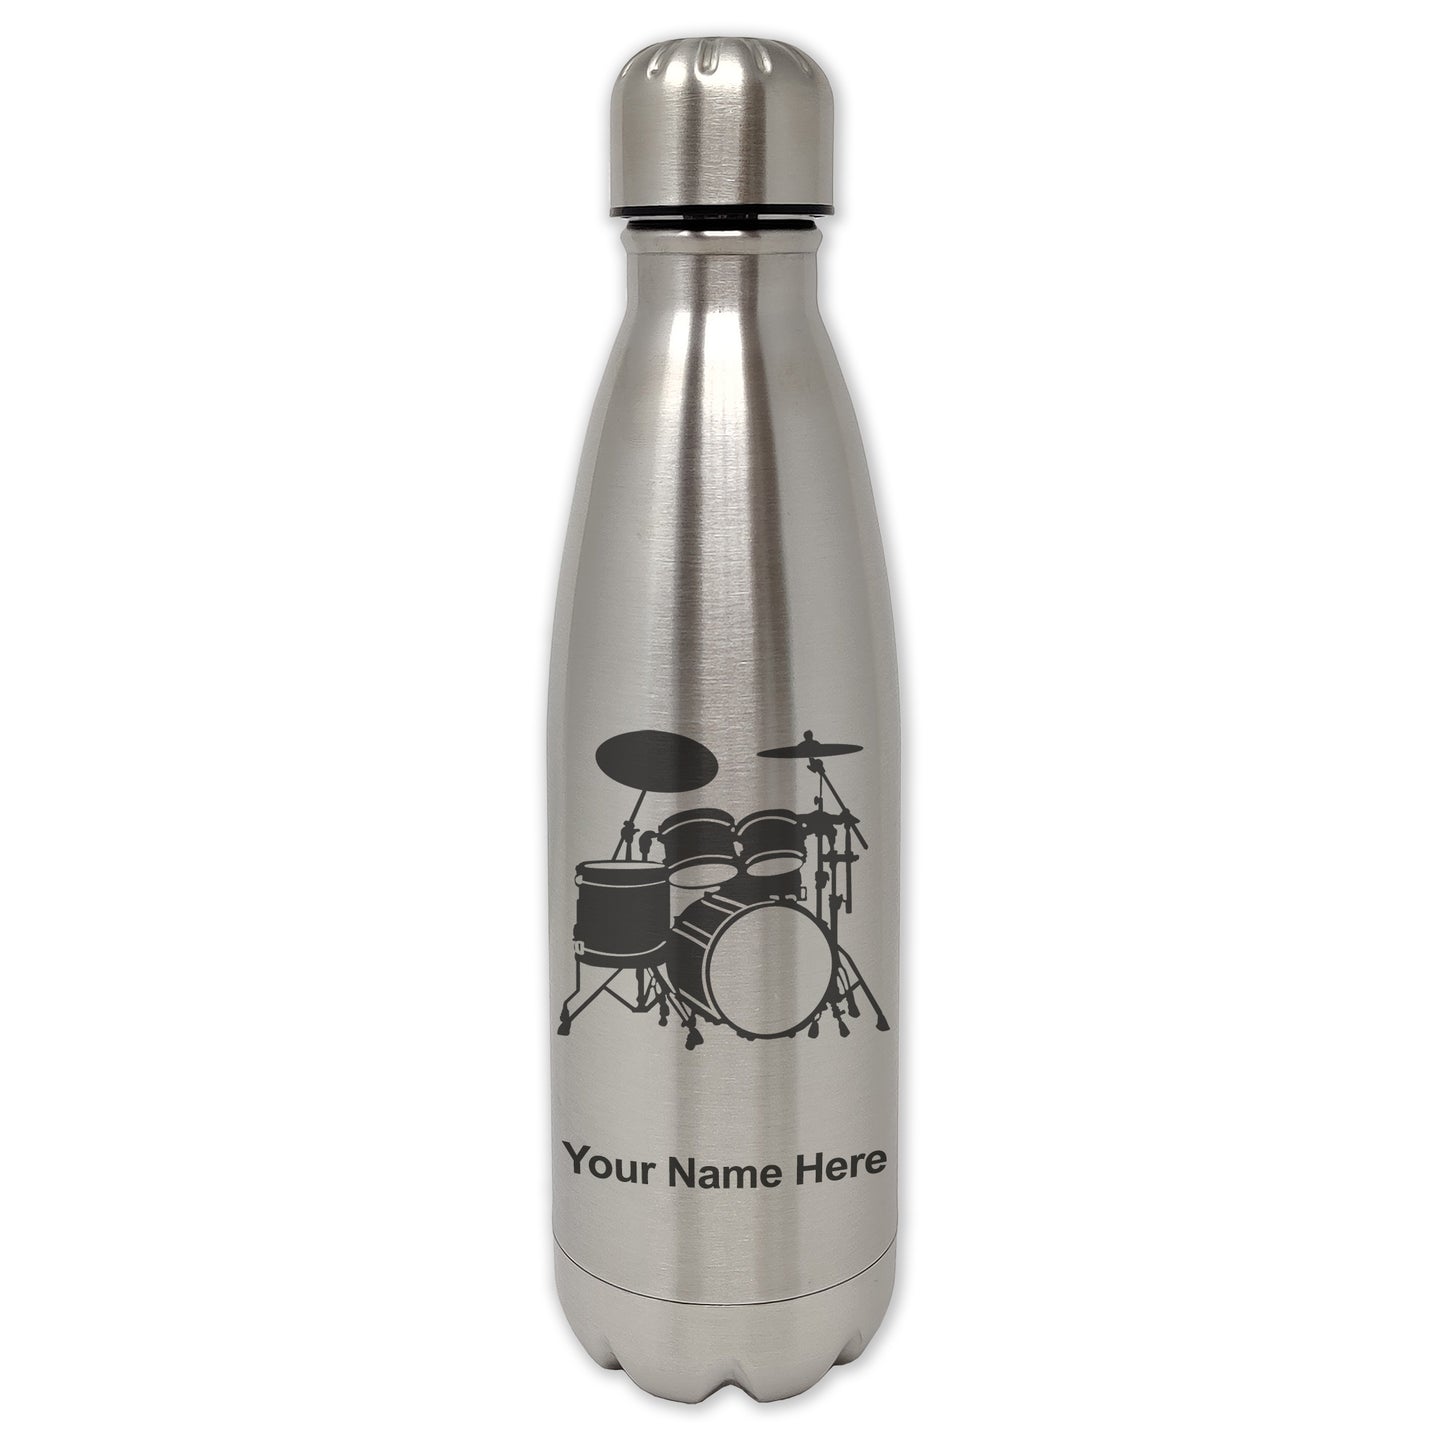 LaserGram Single Wall Water Bottle, Drum Set, Personalized Engraving Included